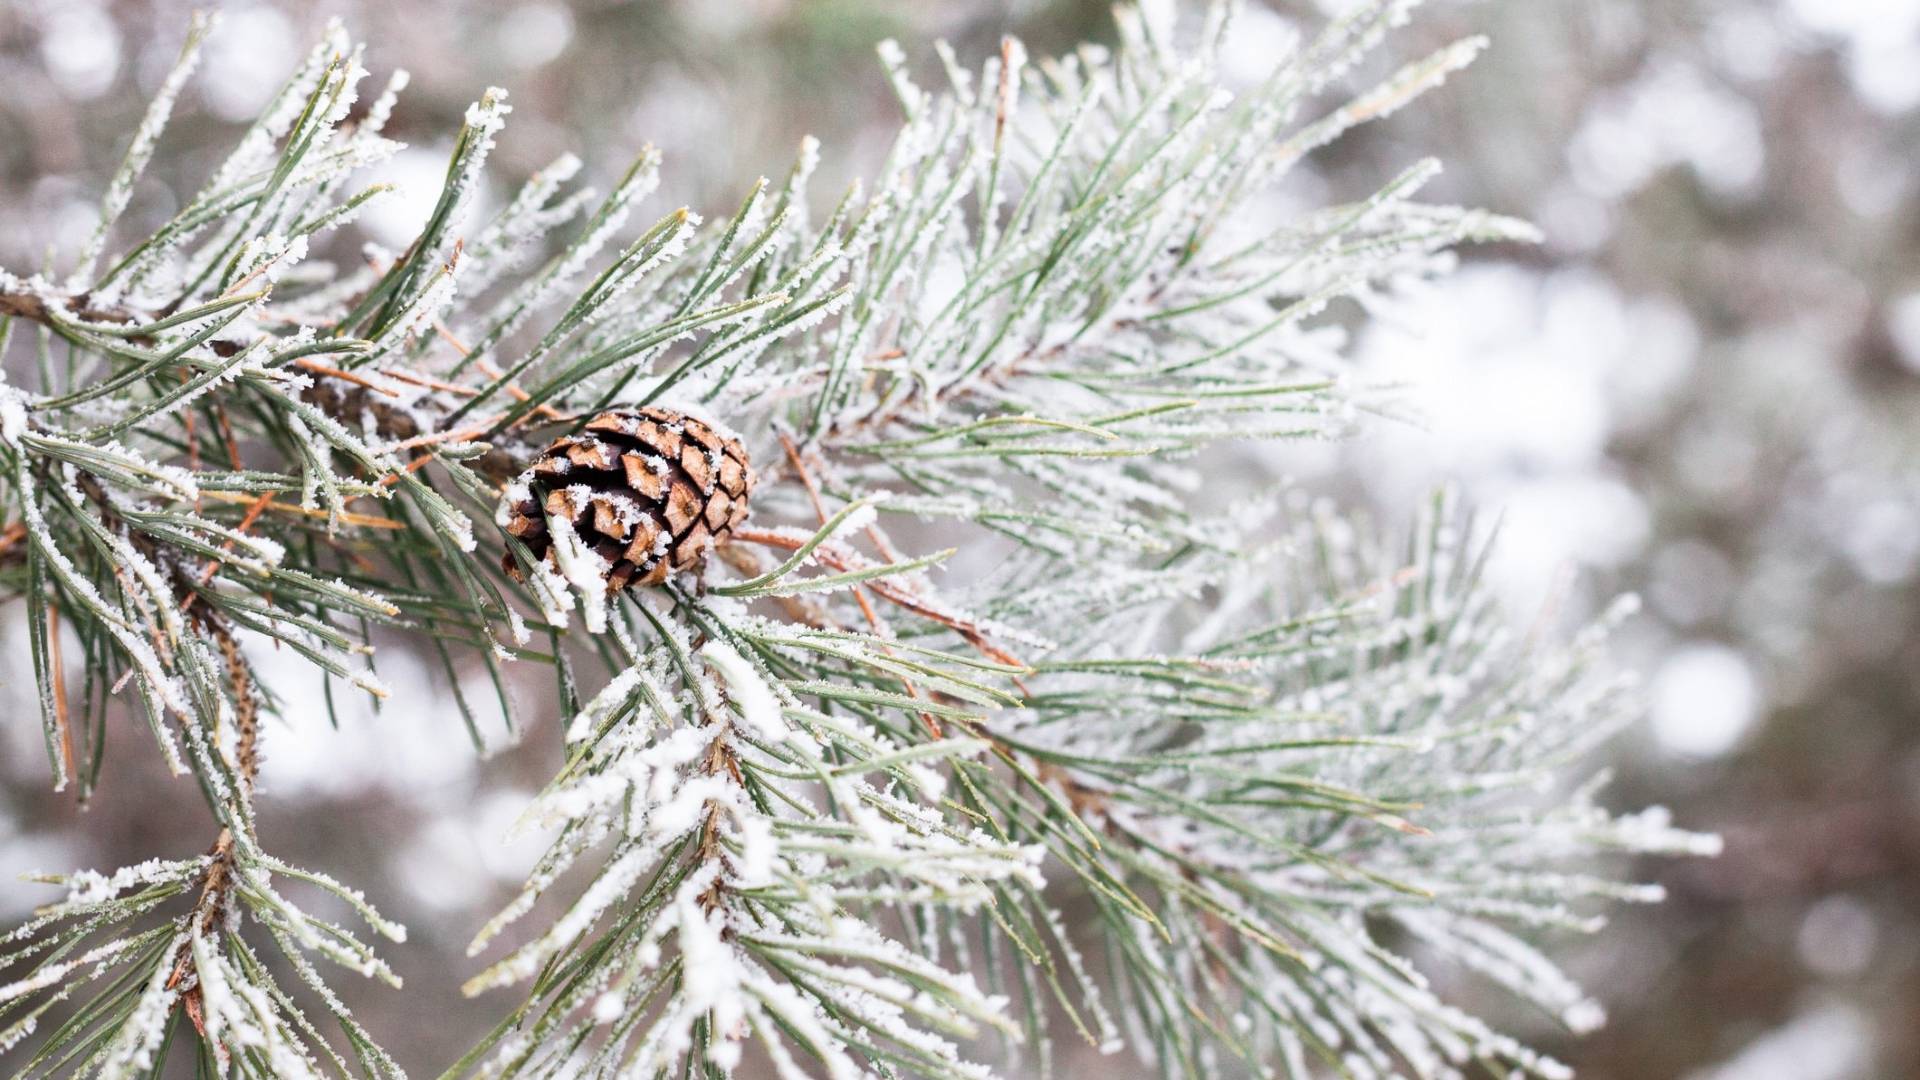 Green pine needles on a branch are dusted with white winter snow.